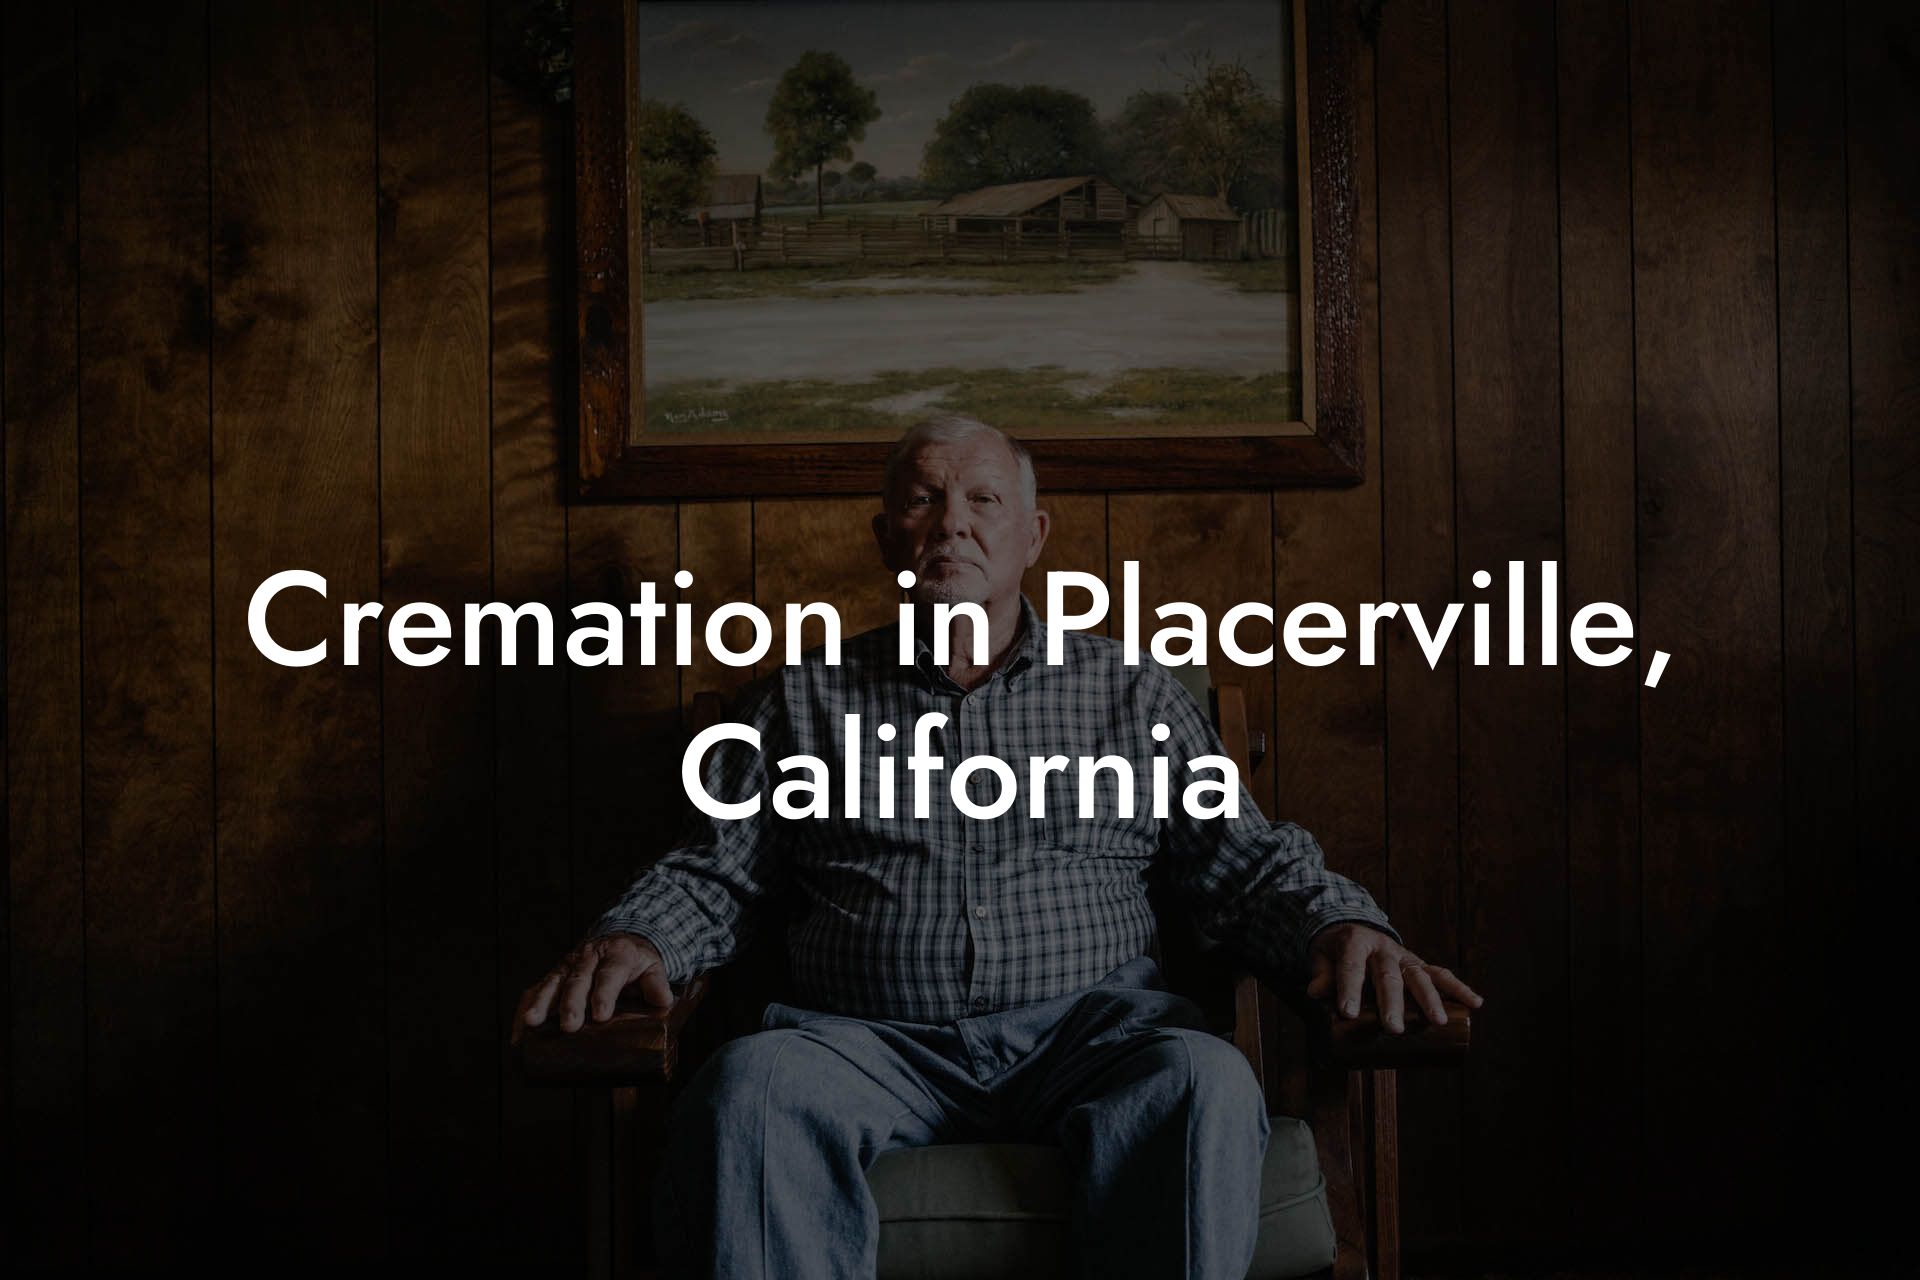 Cremation in Placerville, California